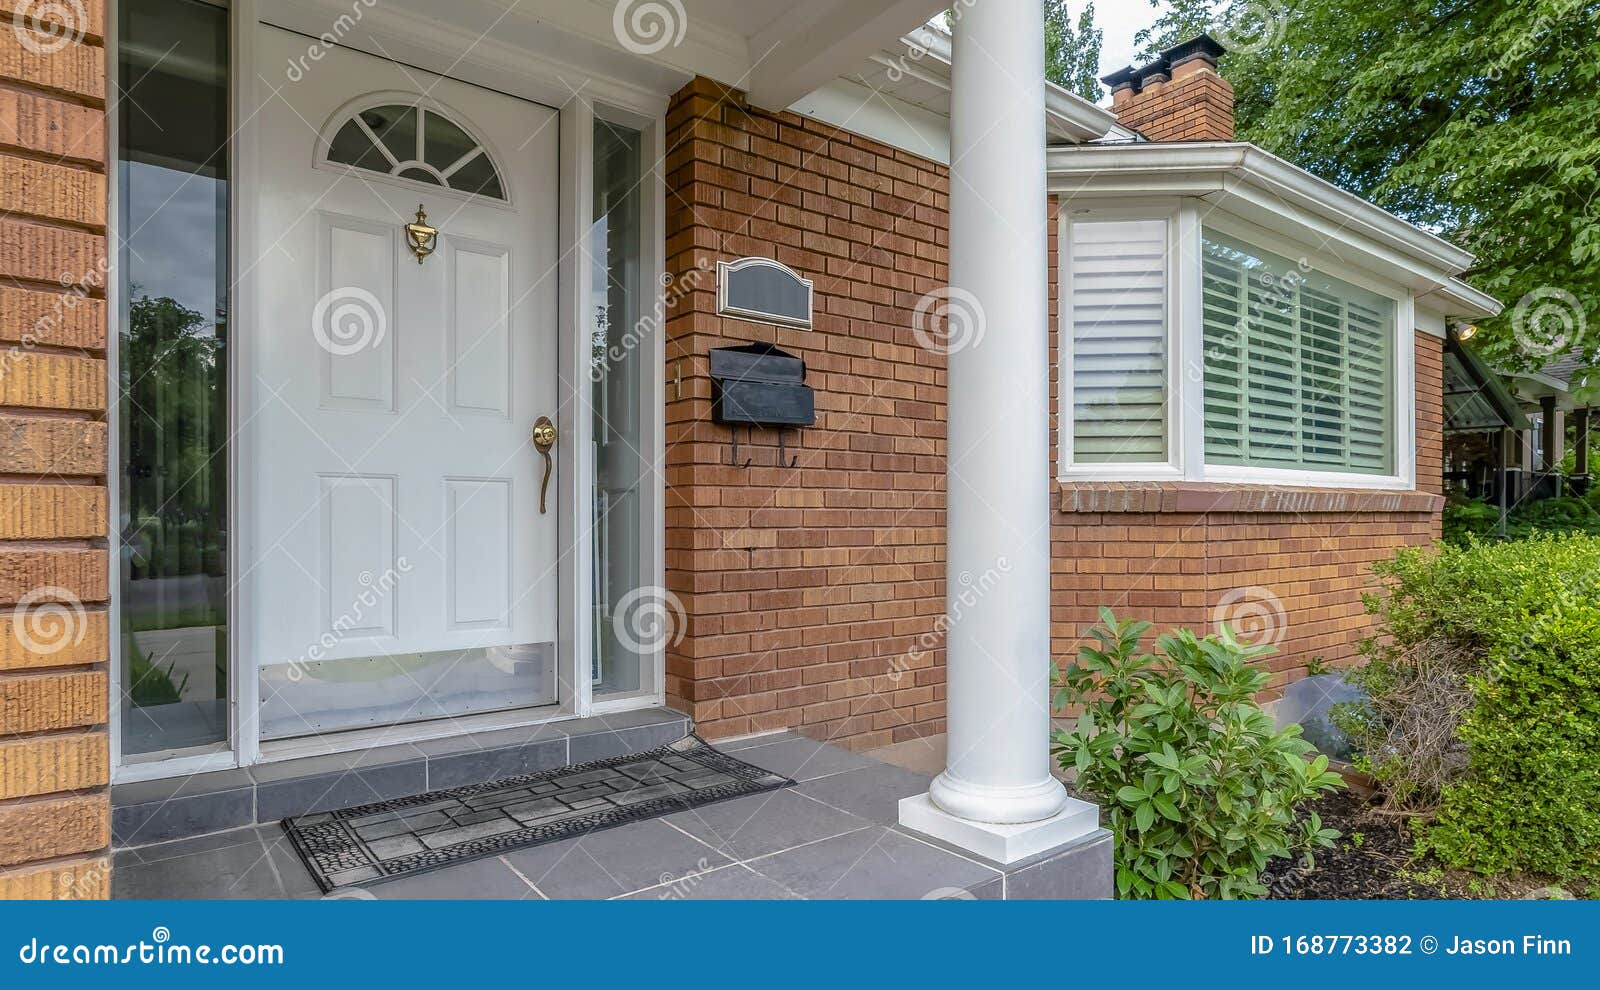 Panorama Facade of Home with Brick Exterior Wall Porch Bay Windows and  White Front Door Stock Photo - Image of architecture, green: 168773382